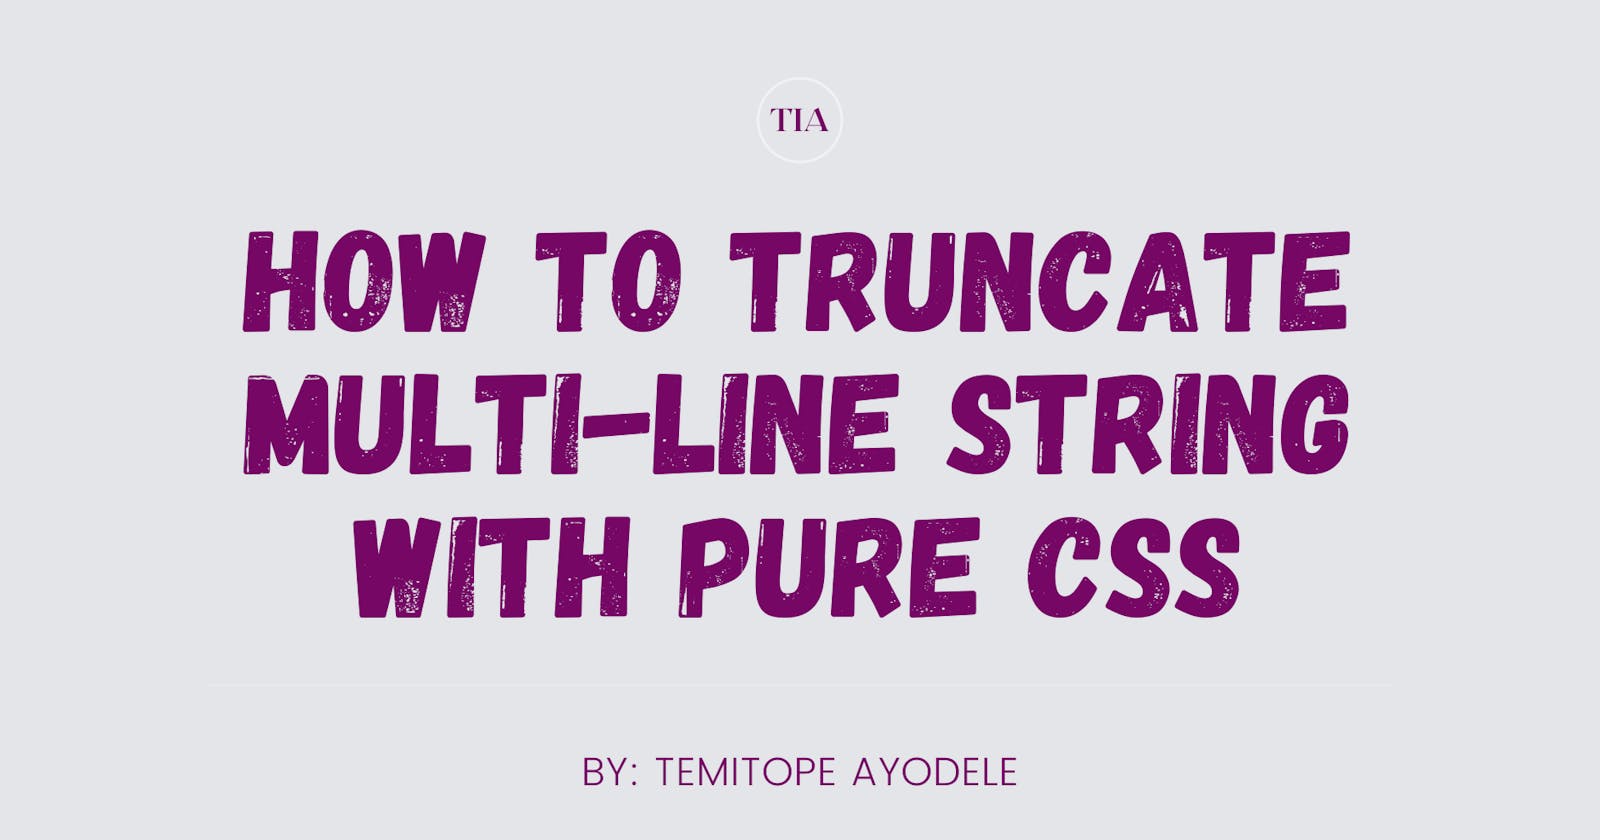 How to truncate multi-line string with Pure CSS